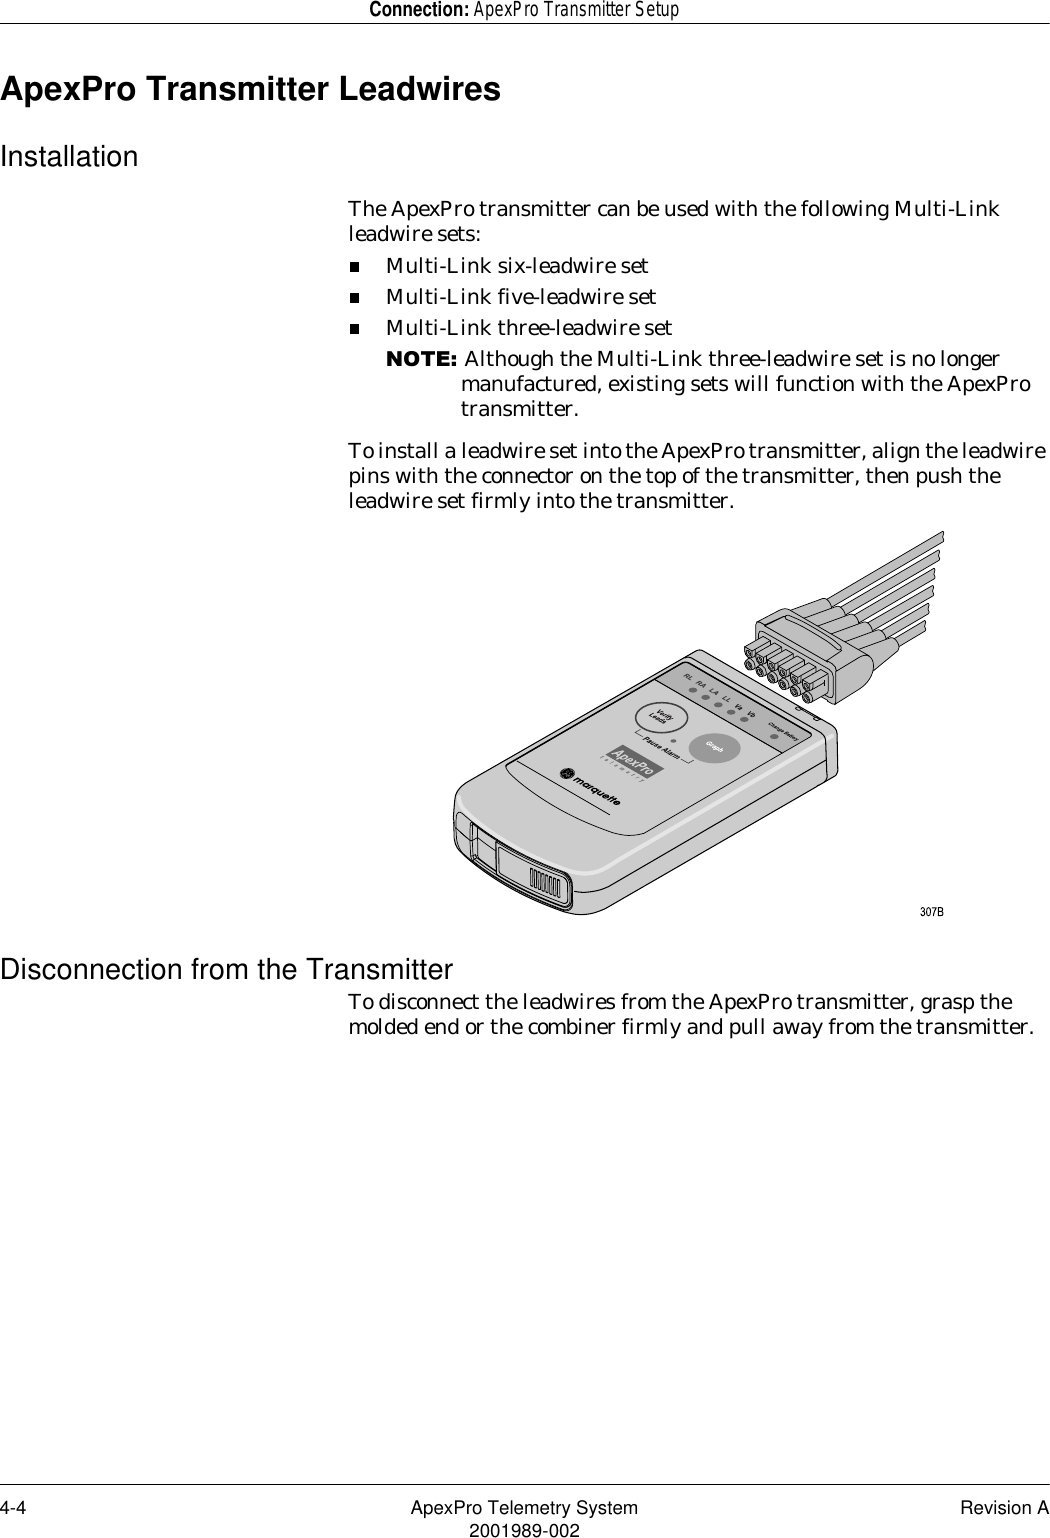 4-4 ApexPro Telemetry System Revision A2001989-002Connection: ApexPro Transmitter SetupApexPro Transmitter LeadwiresInstallationThe ApexPro transmitter can be used with the following Multi-Link leadwire sets:Multi-Link six-leadwire setMulti-Link five-leadwire setMulti-Link three-leadwire set127(Although the Multi-Link three-leadwire set is no longer manufactured, existing sets will function with the ApexPro transmitter.To install a leadwire set into the ApexPro transmitter, align the leadwire pins with the connector on the top of the transmitter, then push the leadwire set firmly into the transmitter.Disconnection from the TransmitterTo disconnect the leadwires from the ApexPro transmitter, grasp the molded end or the combiner firmly and pull away from the transmitter.